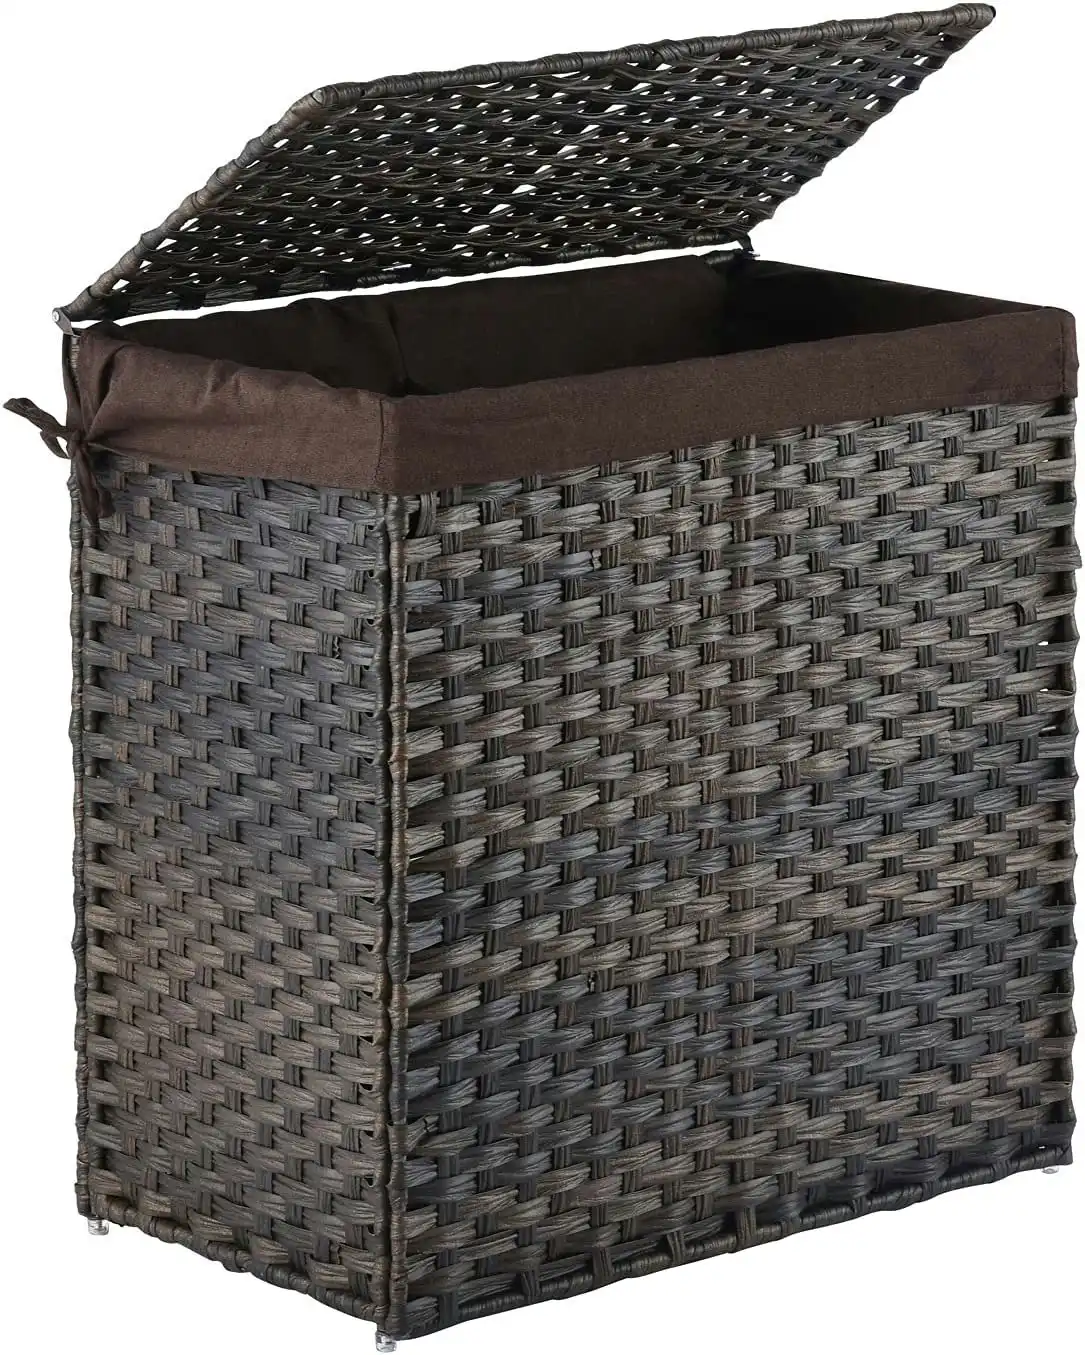 110L Waterproof Synthetic Rattan Foldable Divided Laundry Hamper (Brown)